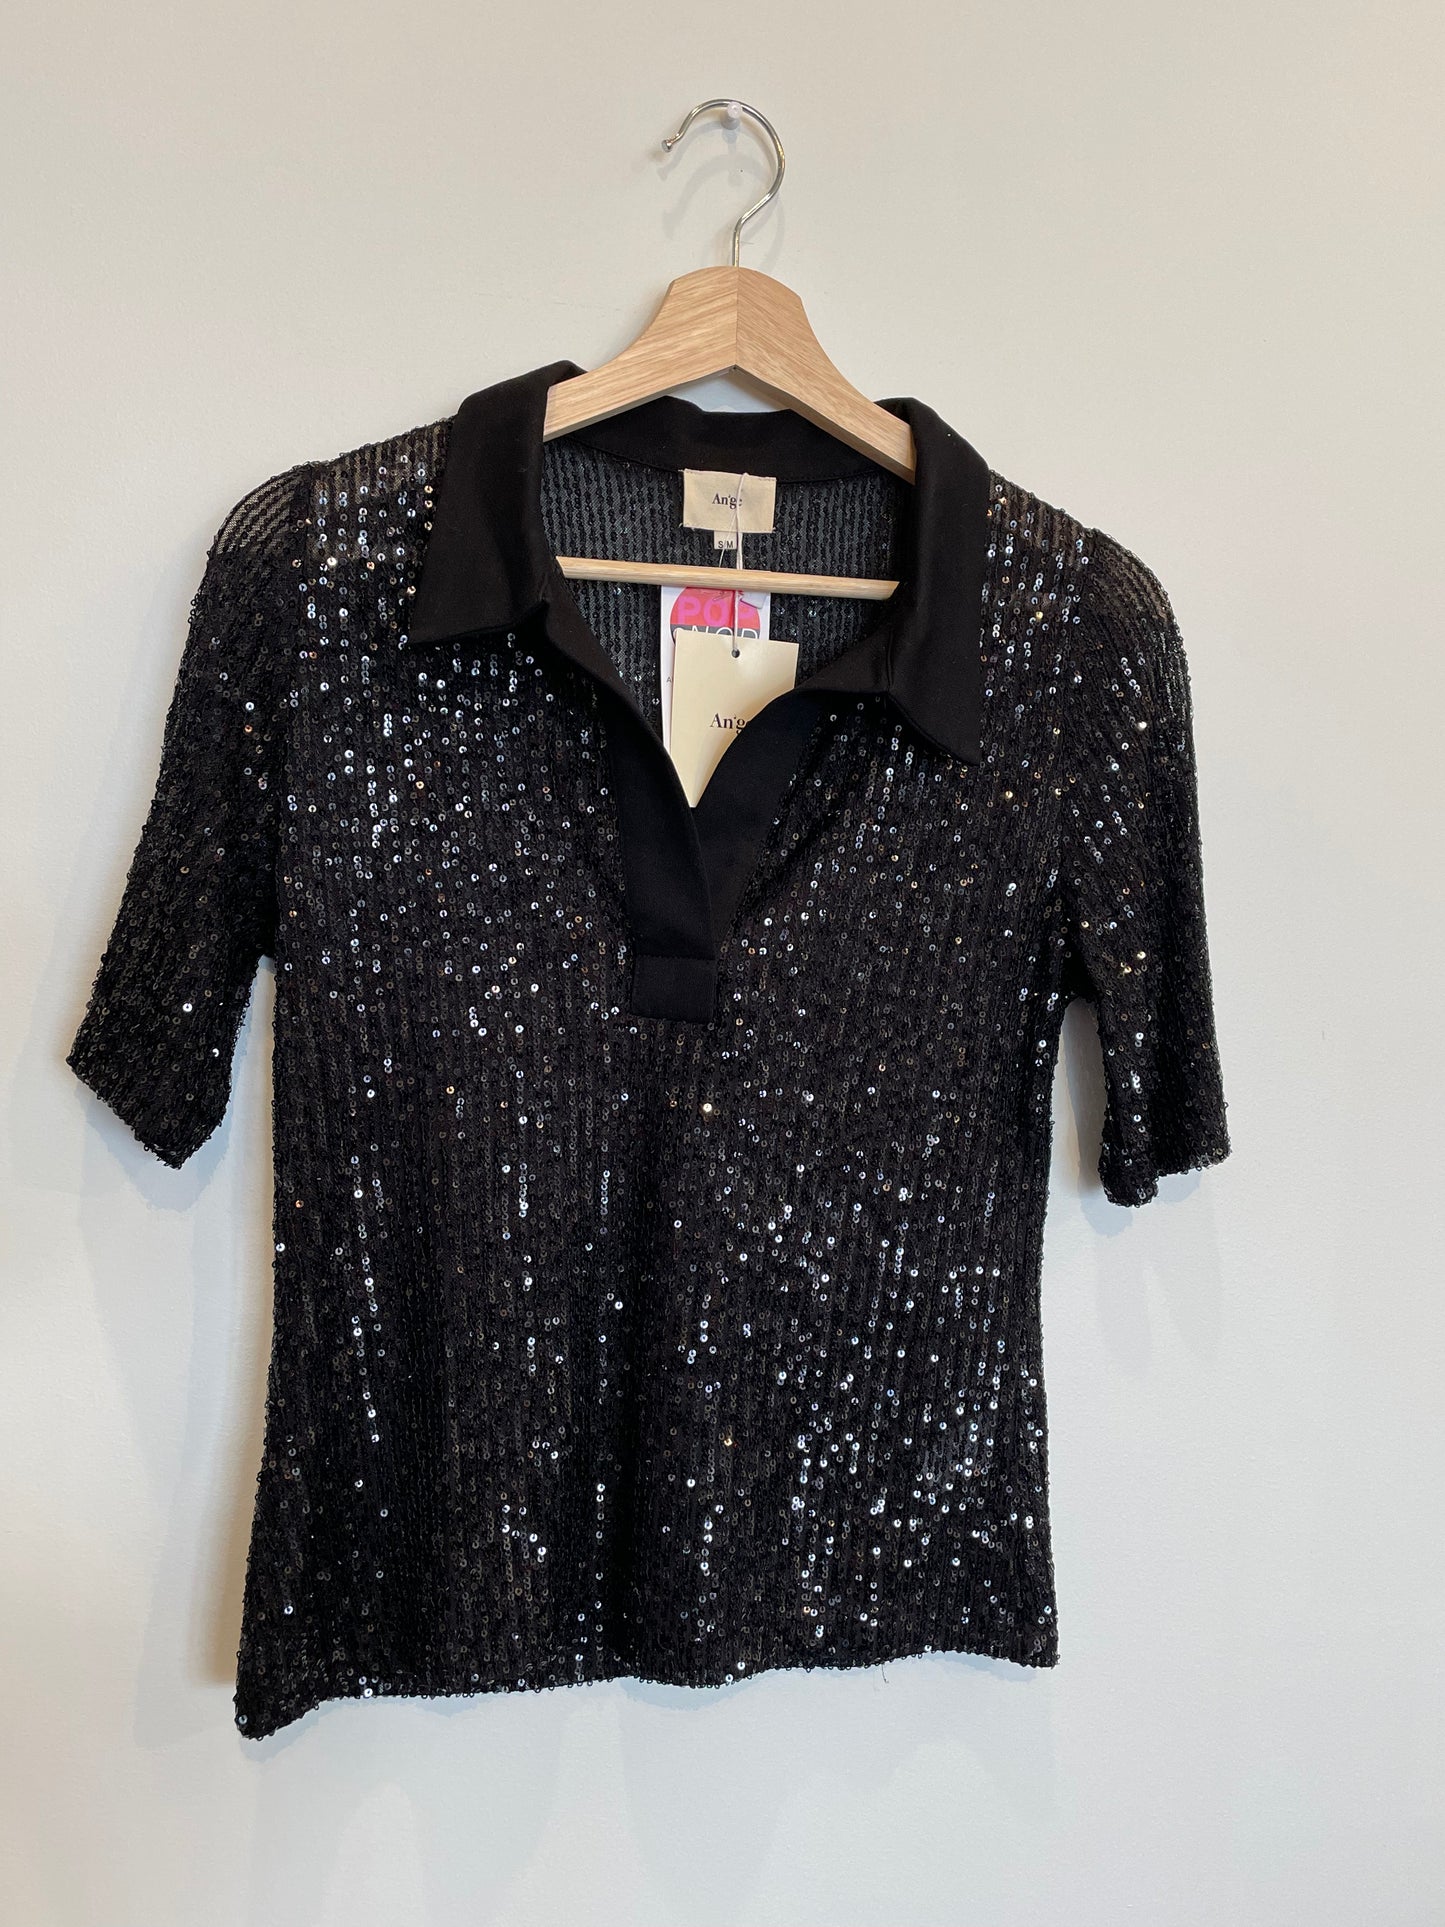 Polo Sequin Top by An'ge